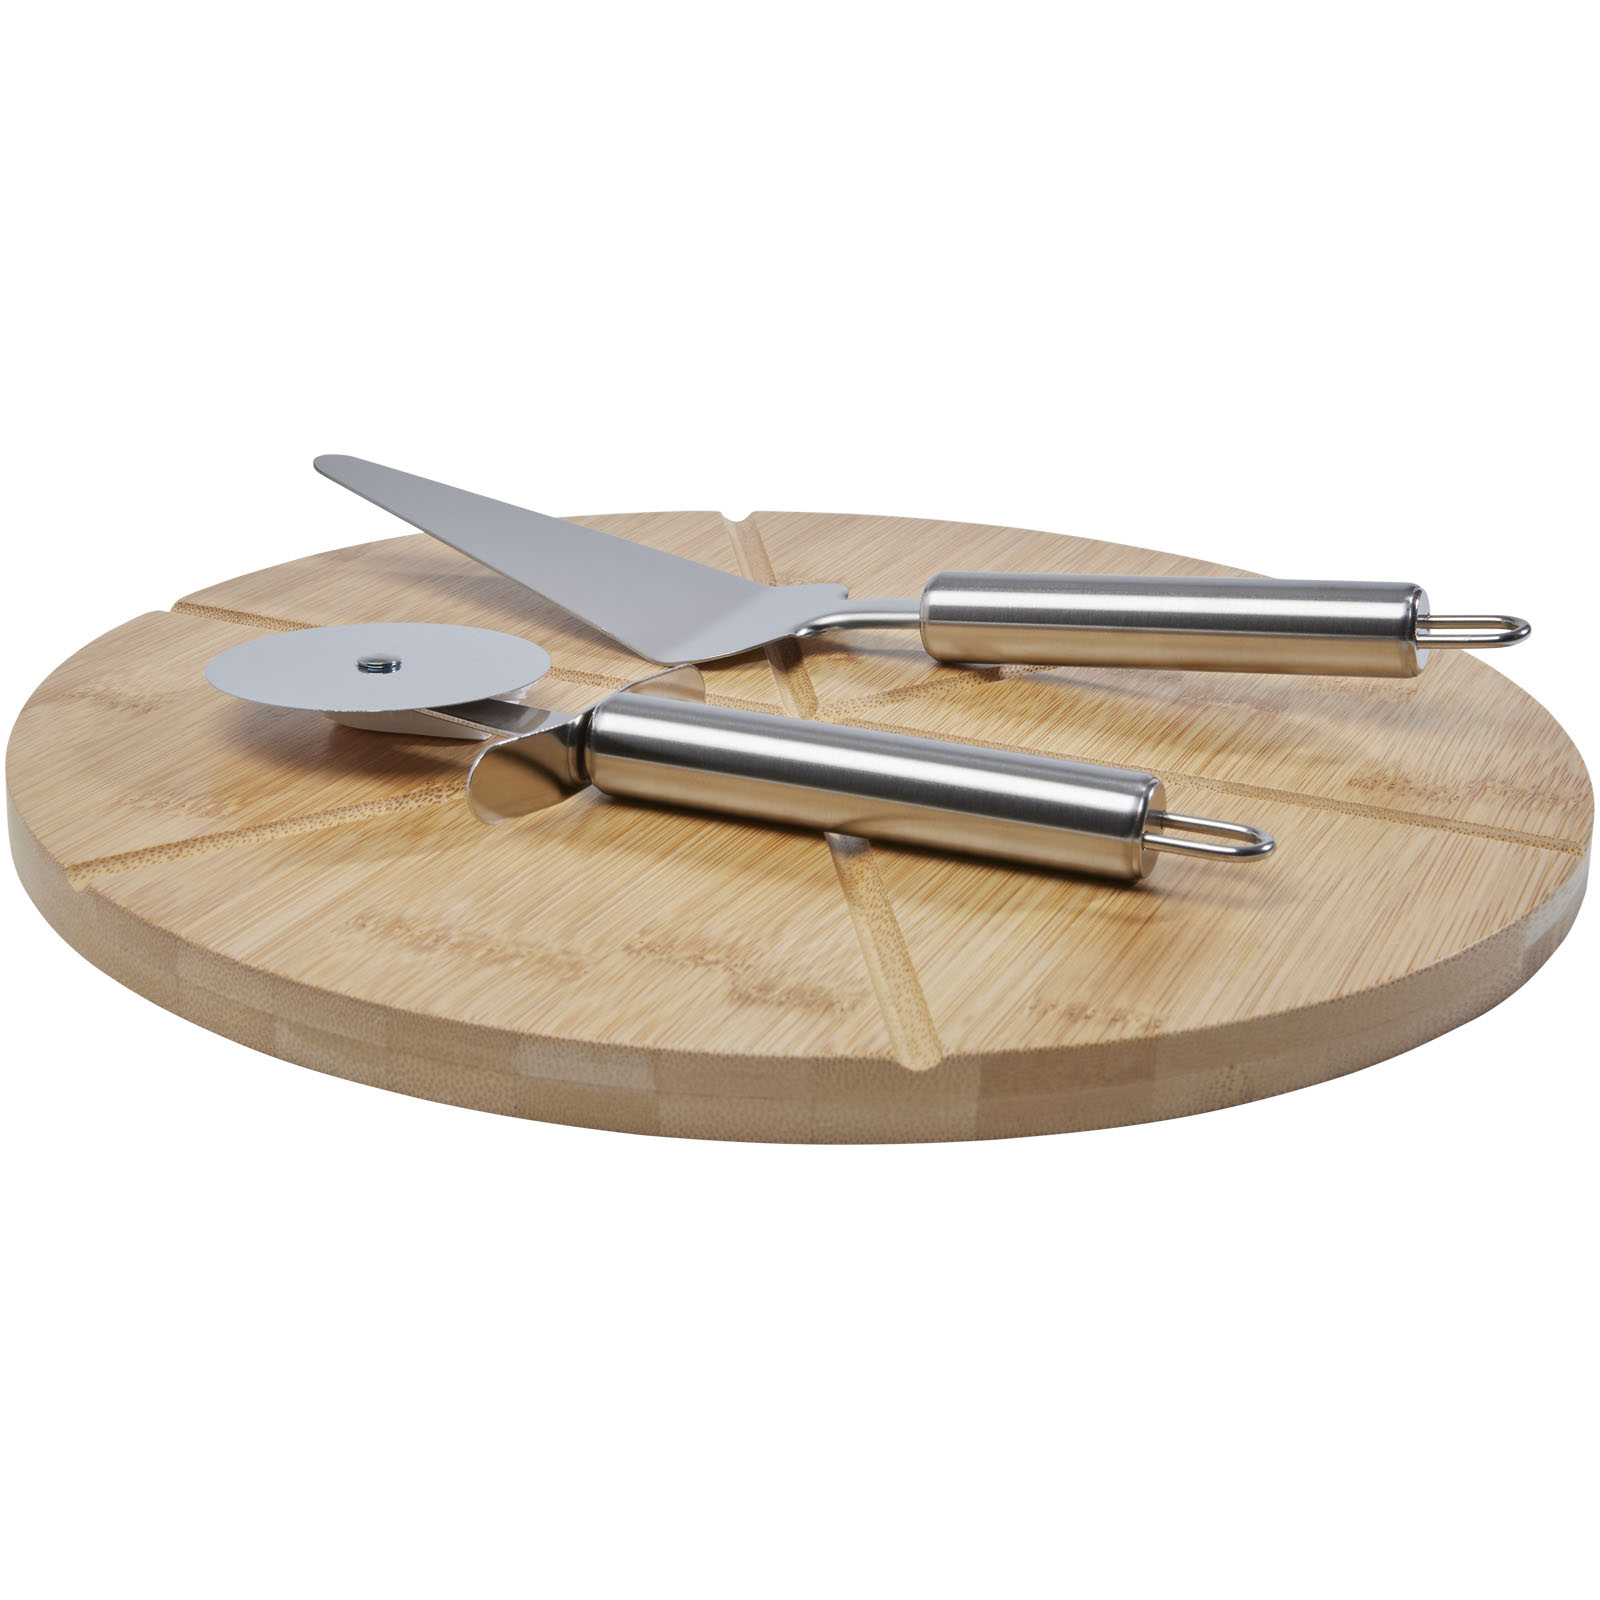 Advertising Serving Sets - Mangiary bamboo pizza peel and tools